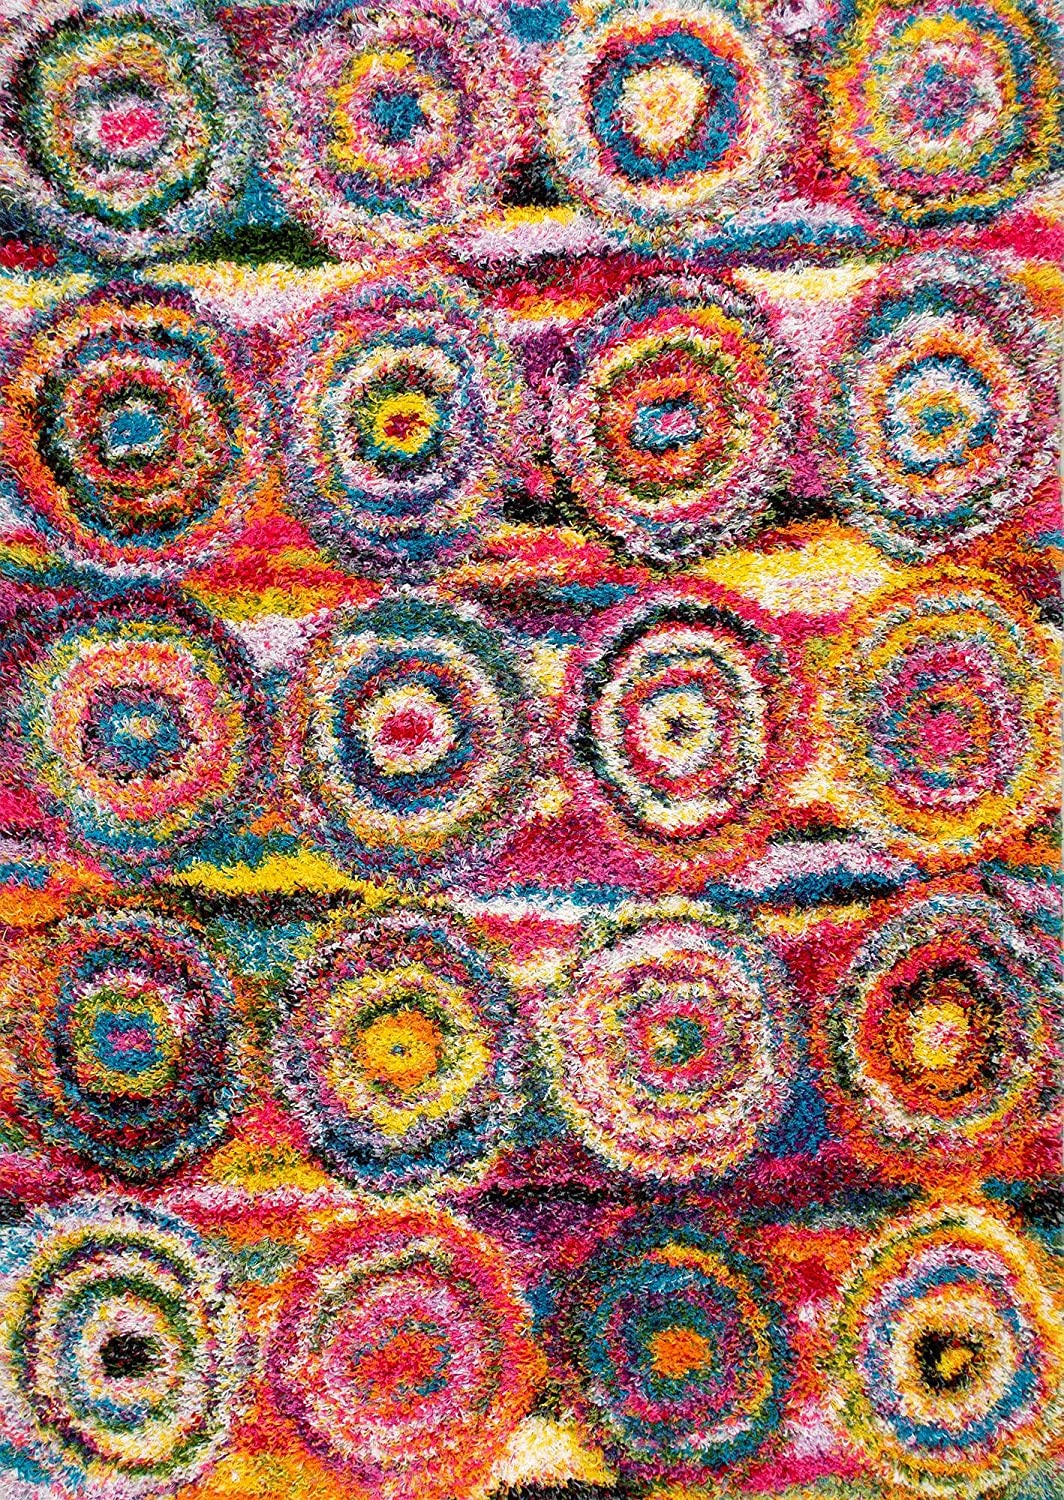 A shaggy rainbow rug with circles is shown as an example of  classroom rugs.